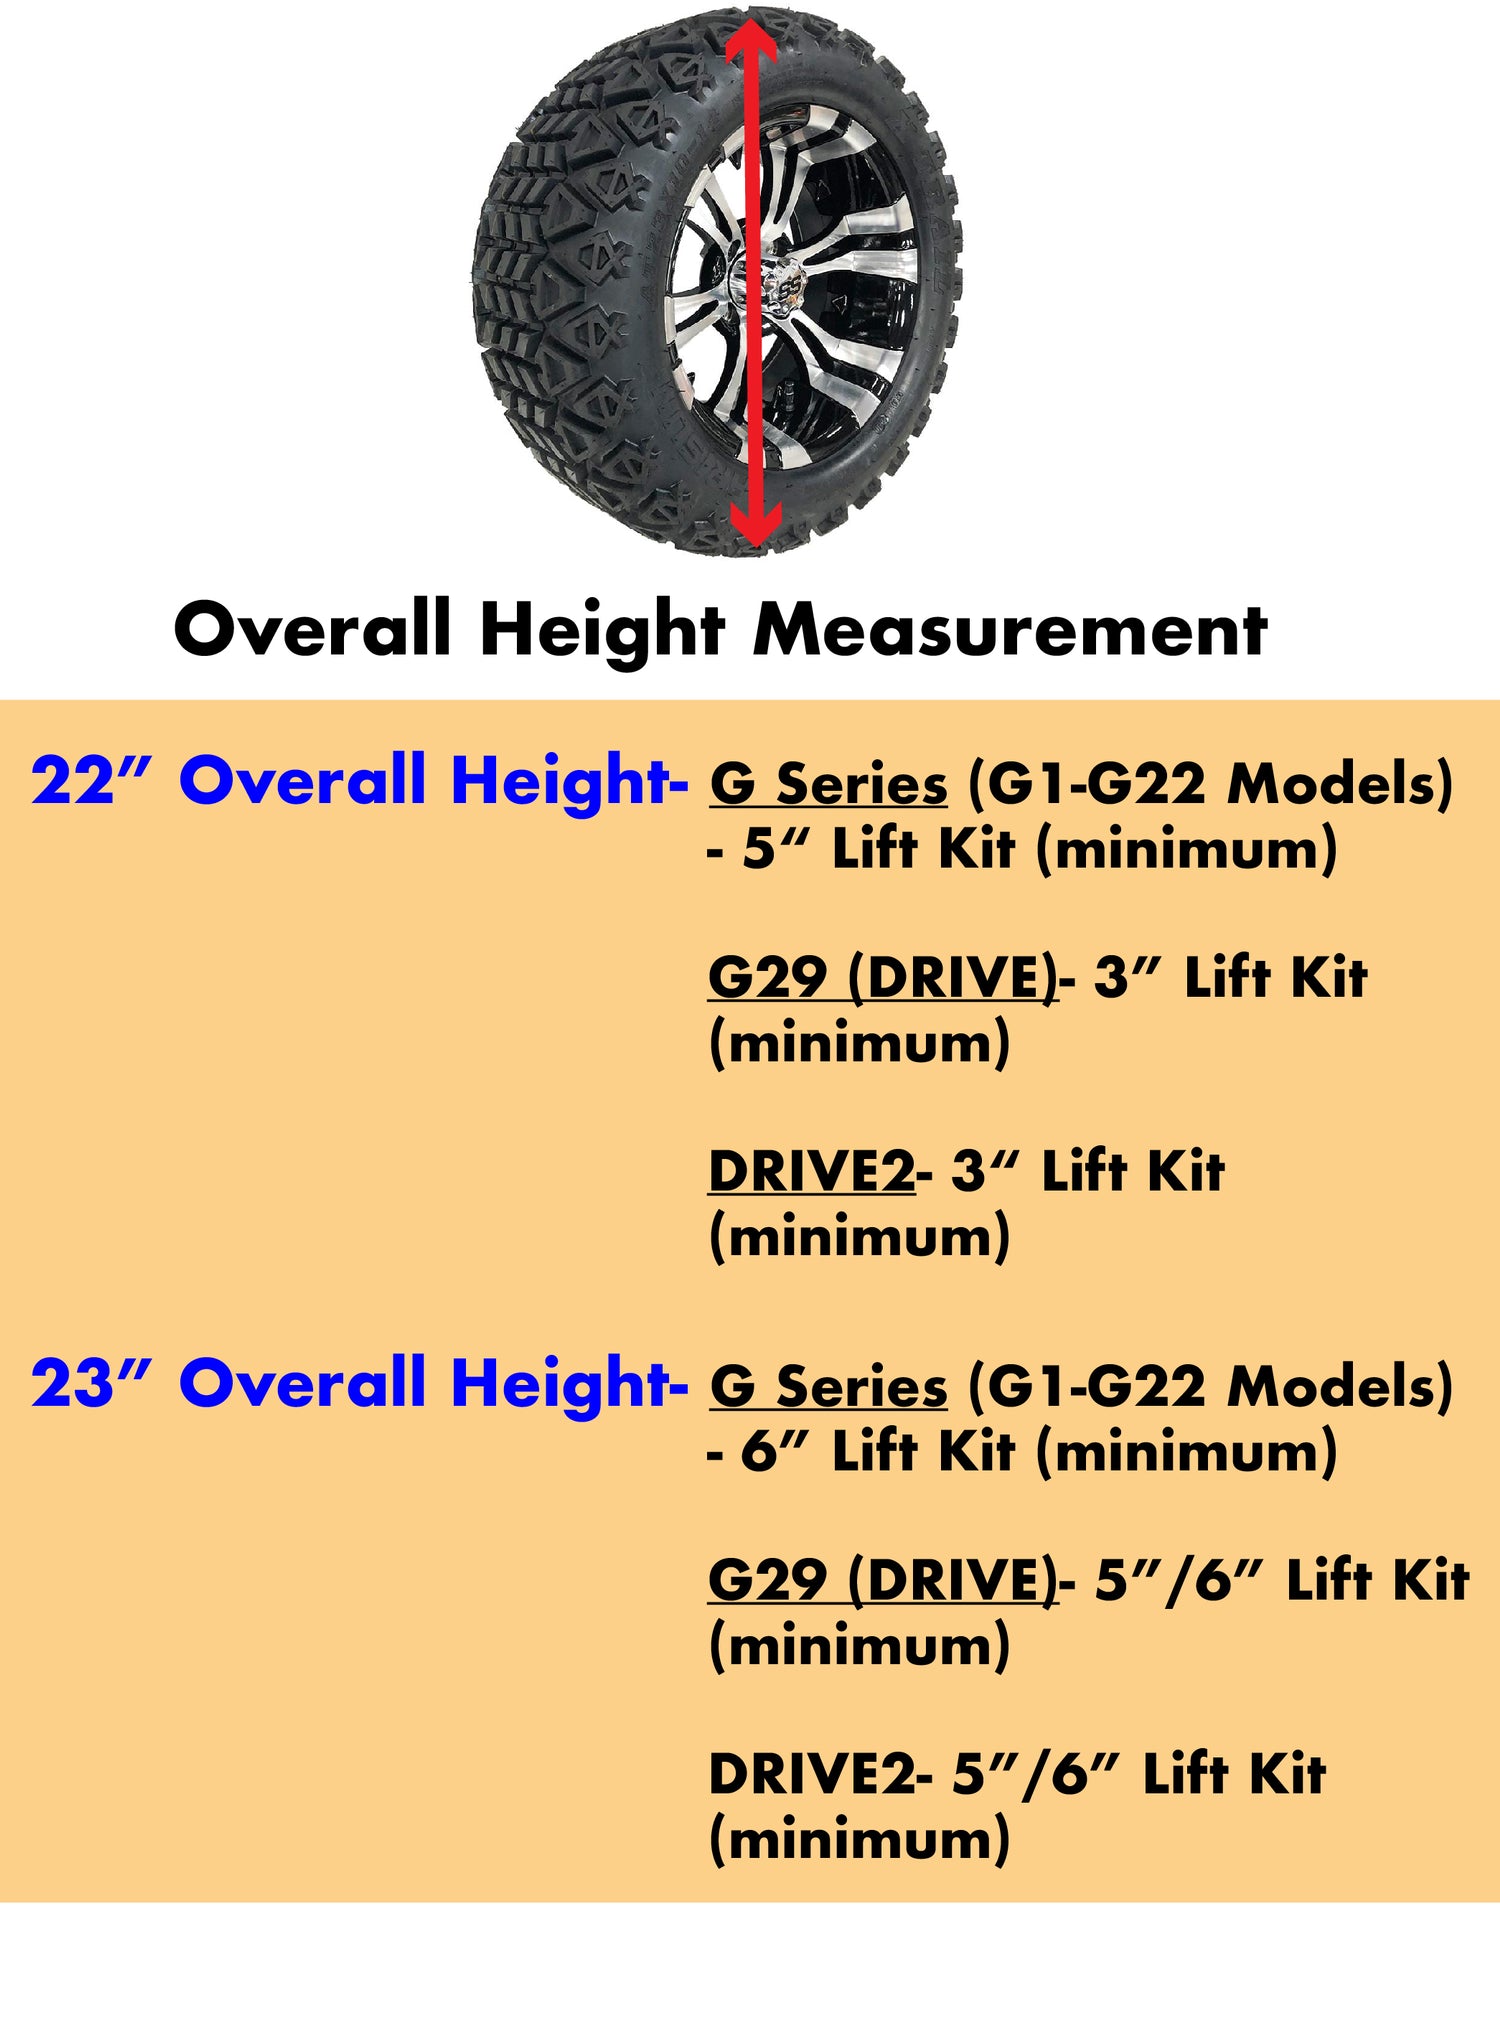 Yamaha Wheel and Tire Measurements for 22"-23" Overall Height Combinations